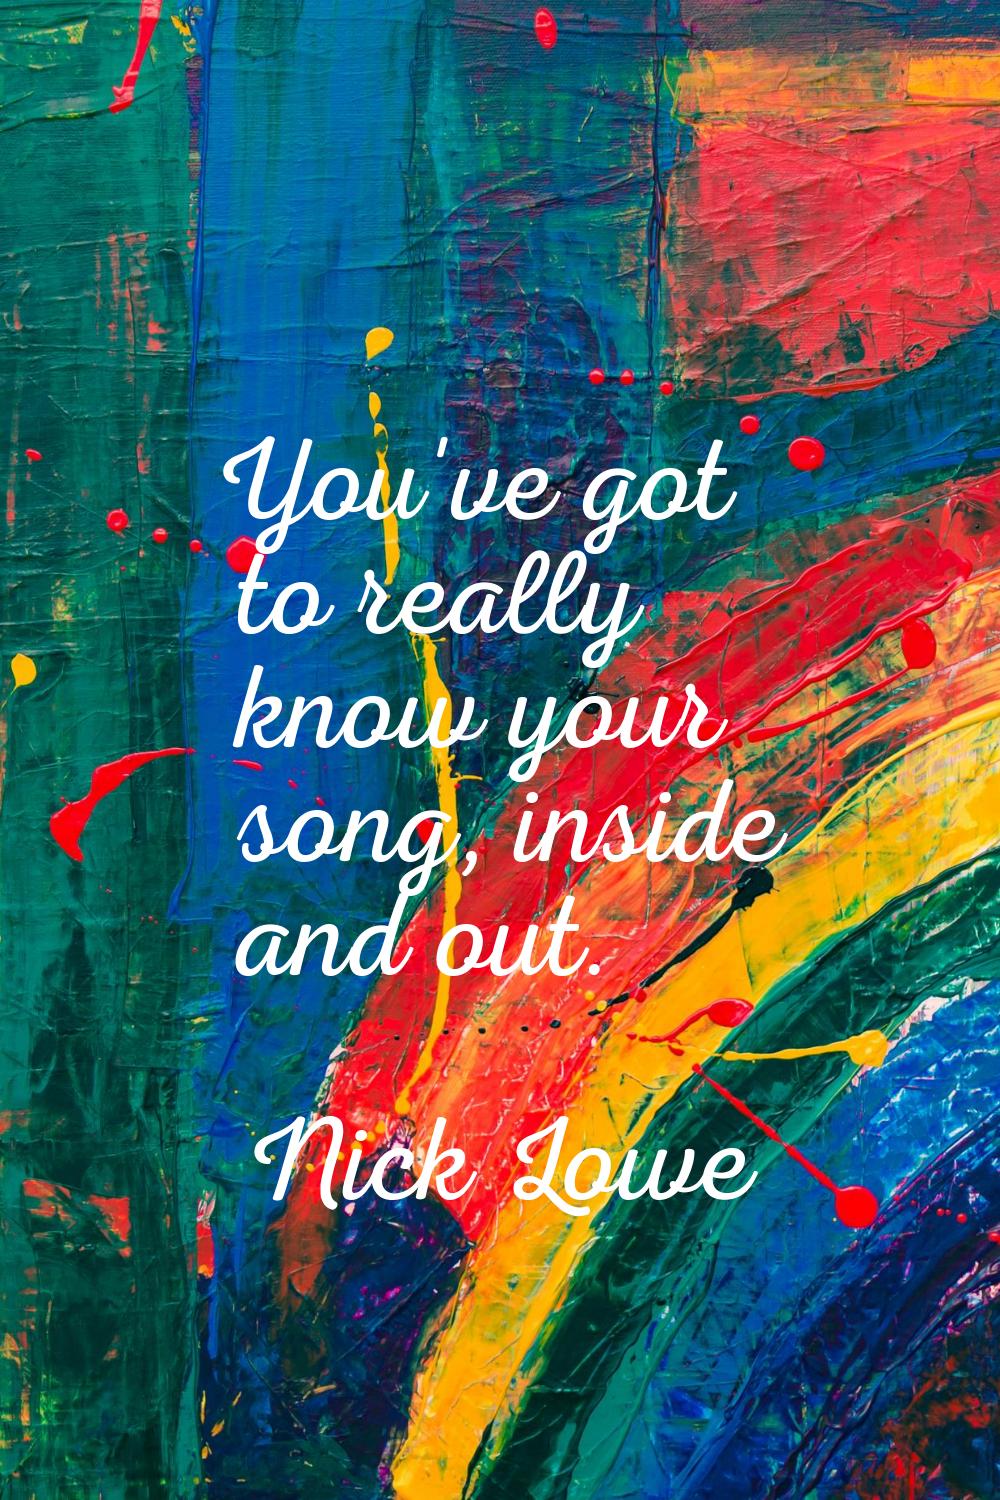 You've got to really know your song, inside and out.